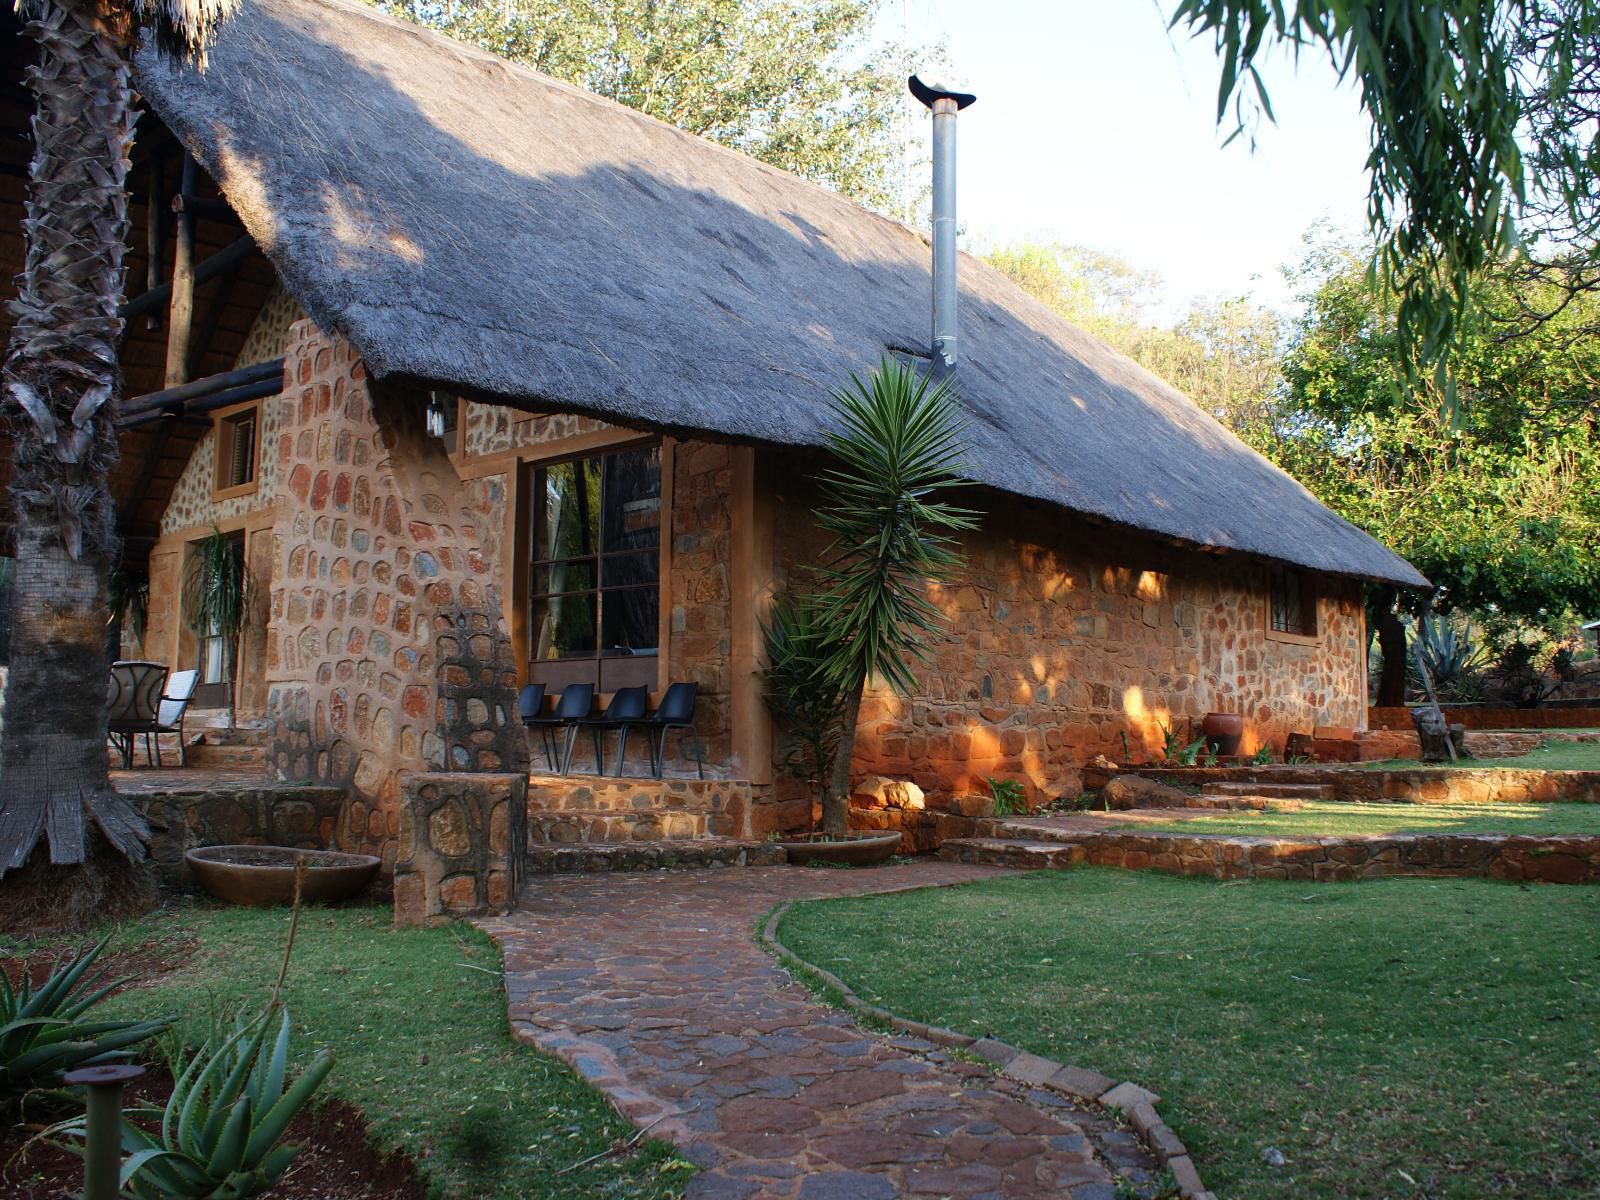 Riverman Cabin Dullstroom Mpumalanga South Africa Building, Architecture